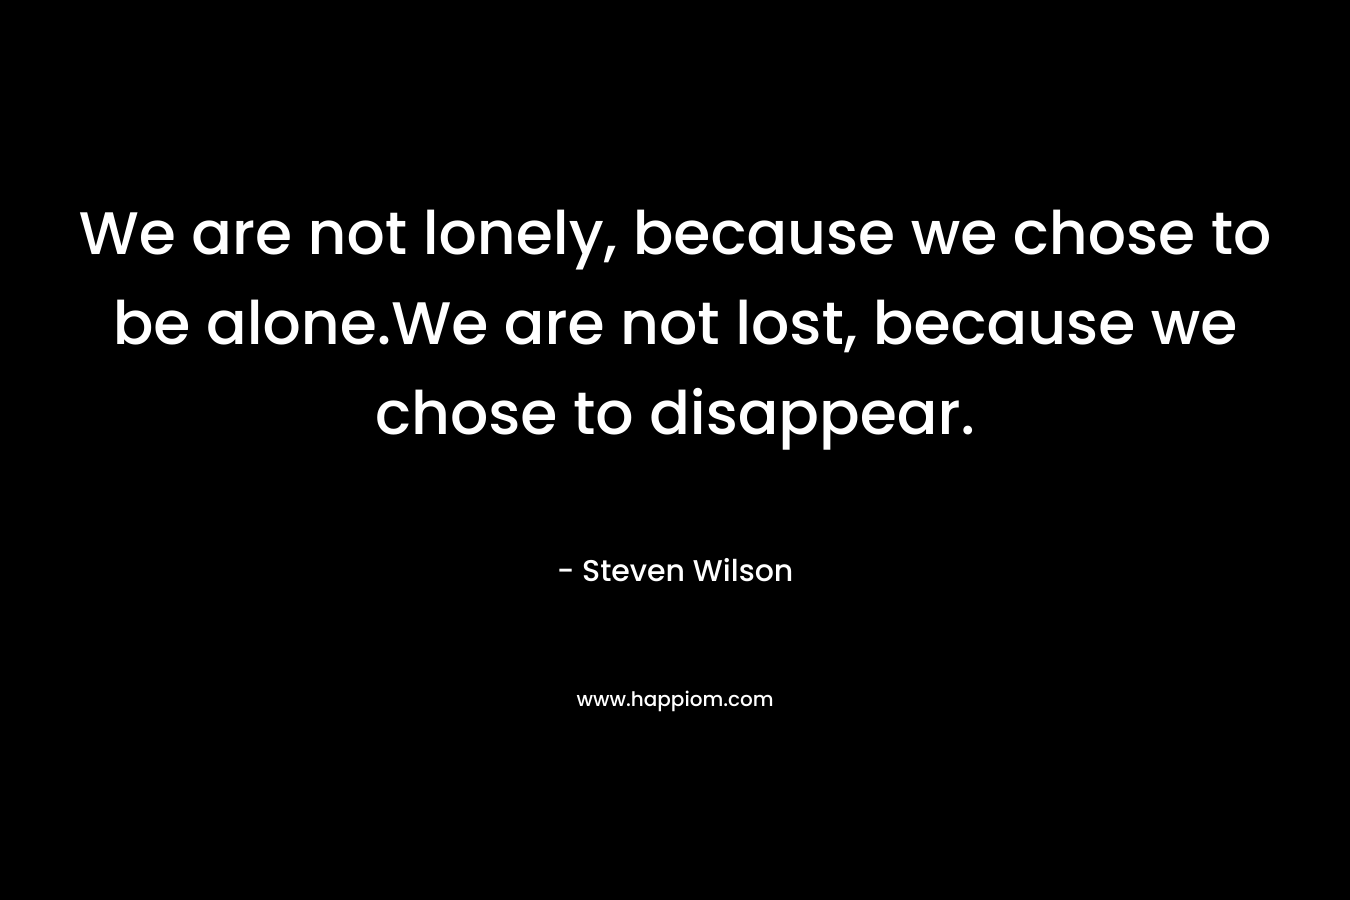 We are not lonely, because we chose to be alone.We are not lost, because we chose to disappear.